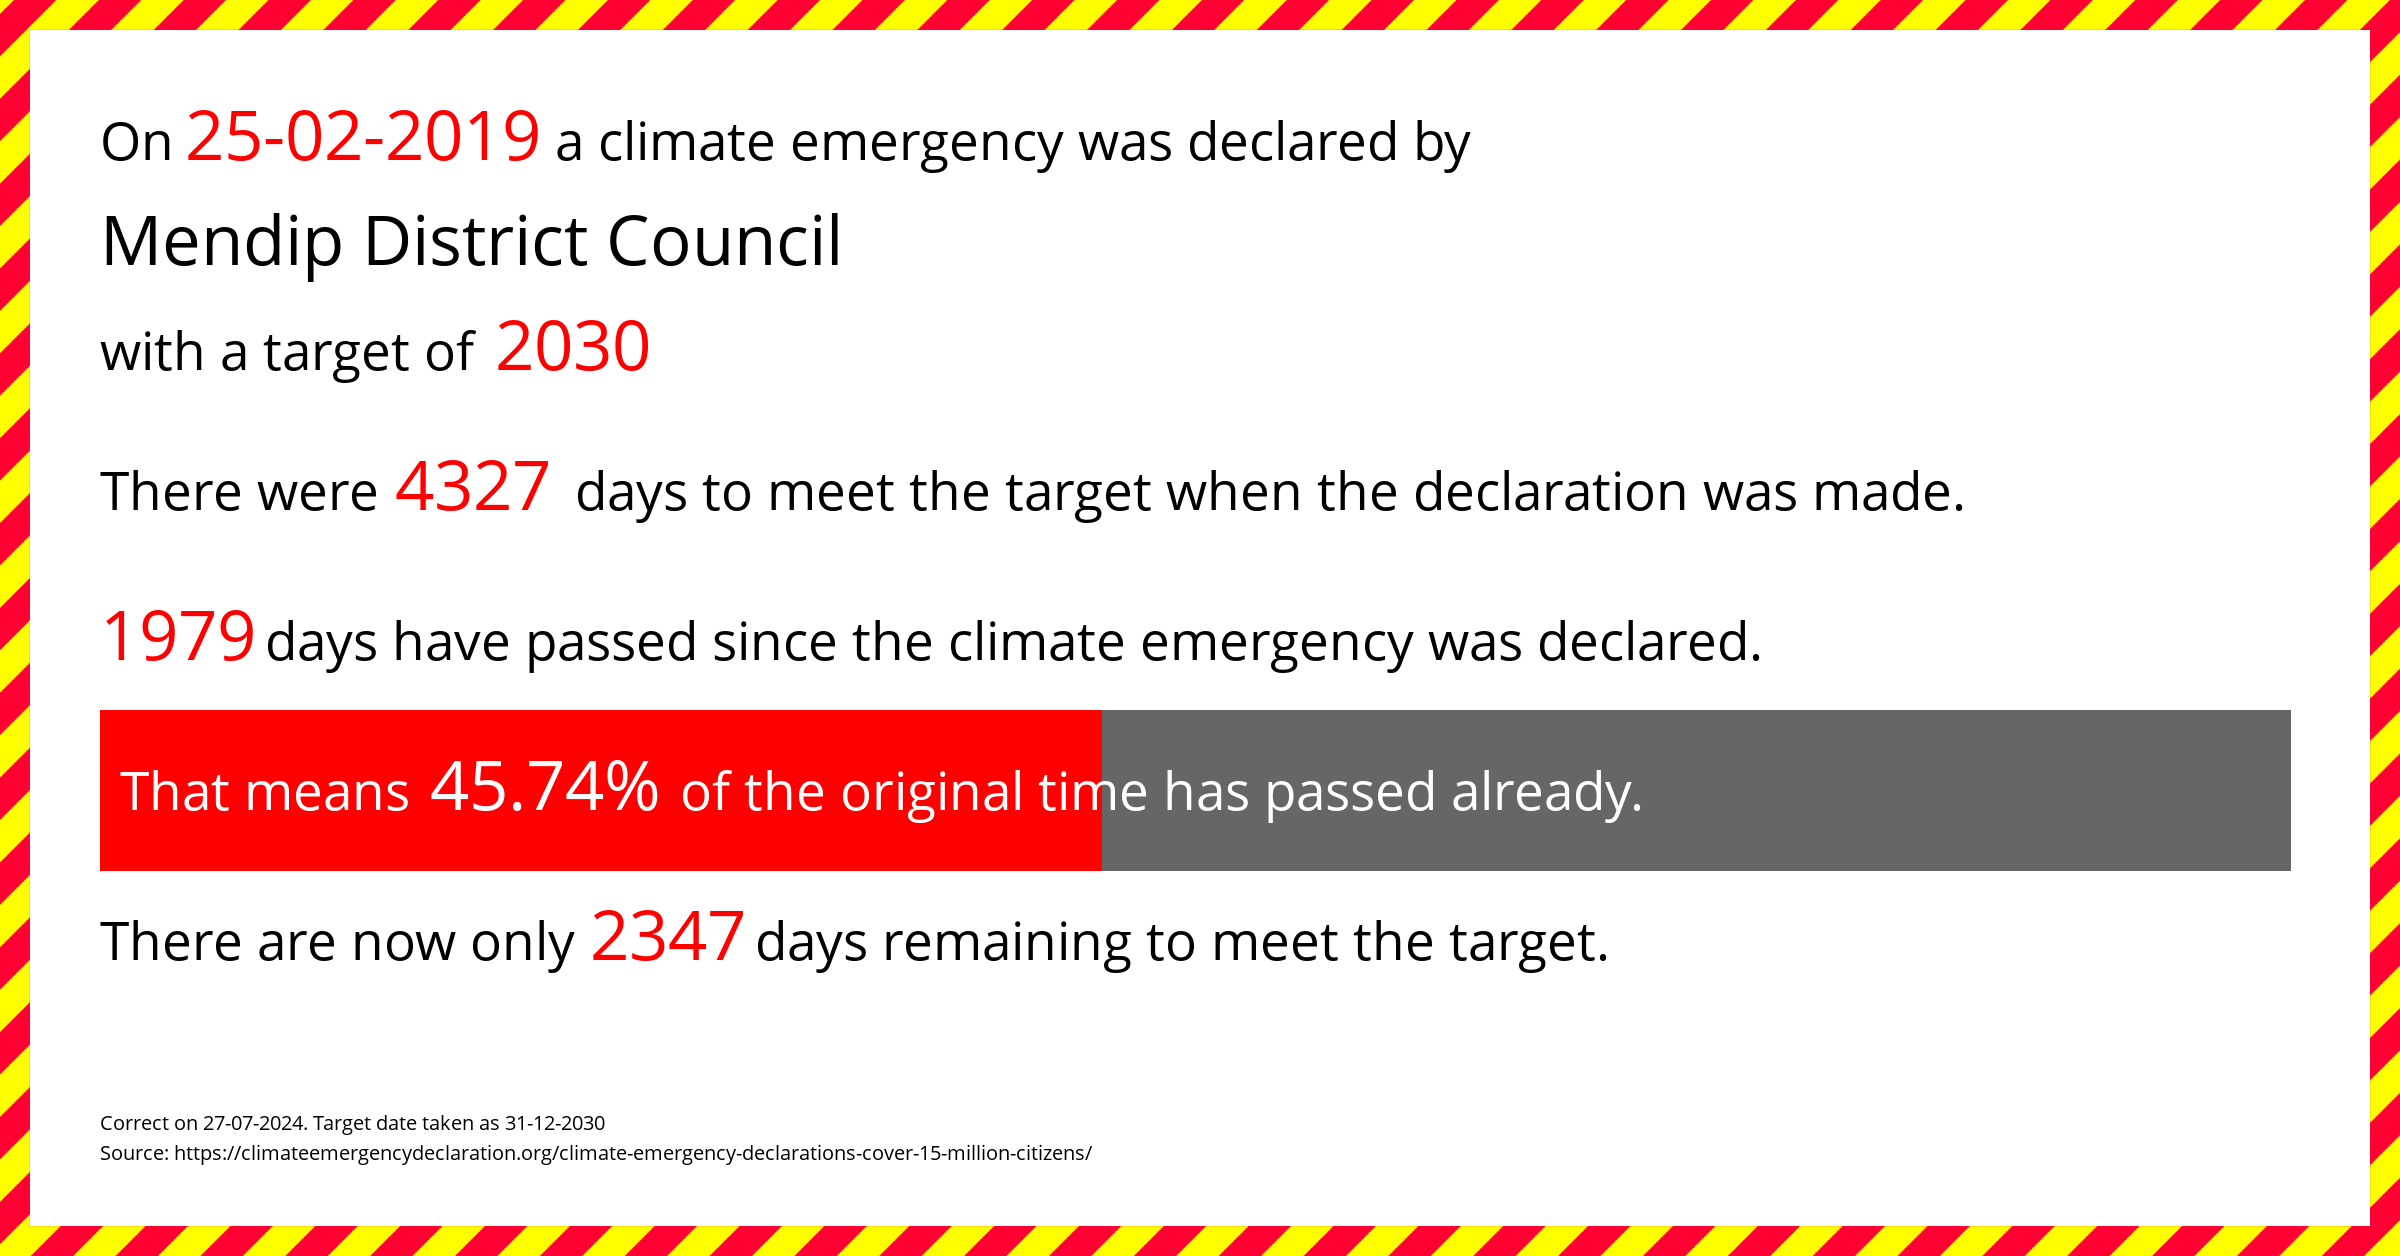 Mendip District Council declared a Climate emergency on Monday 25th February 2019, with a target of 2030.